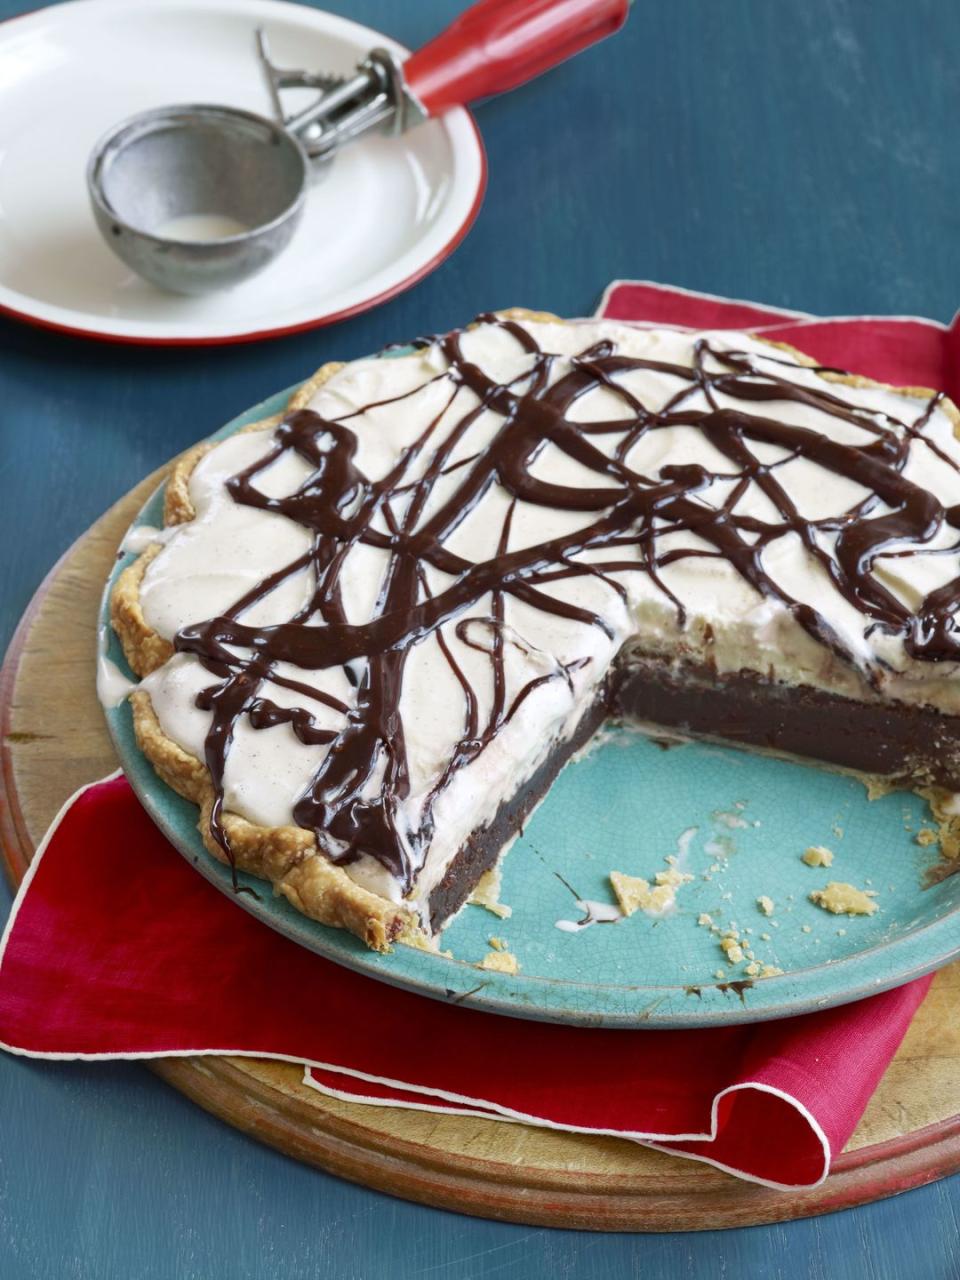 mississippi mud pie in a light teal colored pie dish with a large portion removed to show the inside